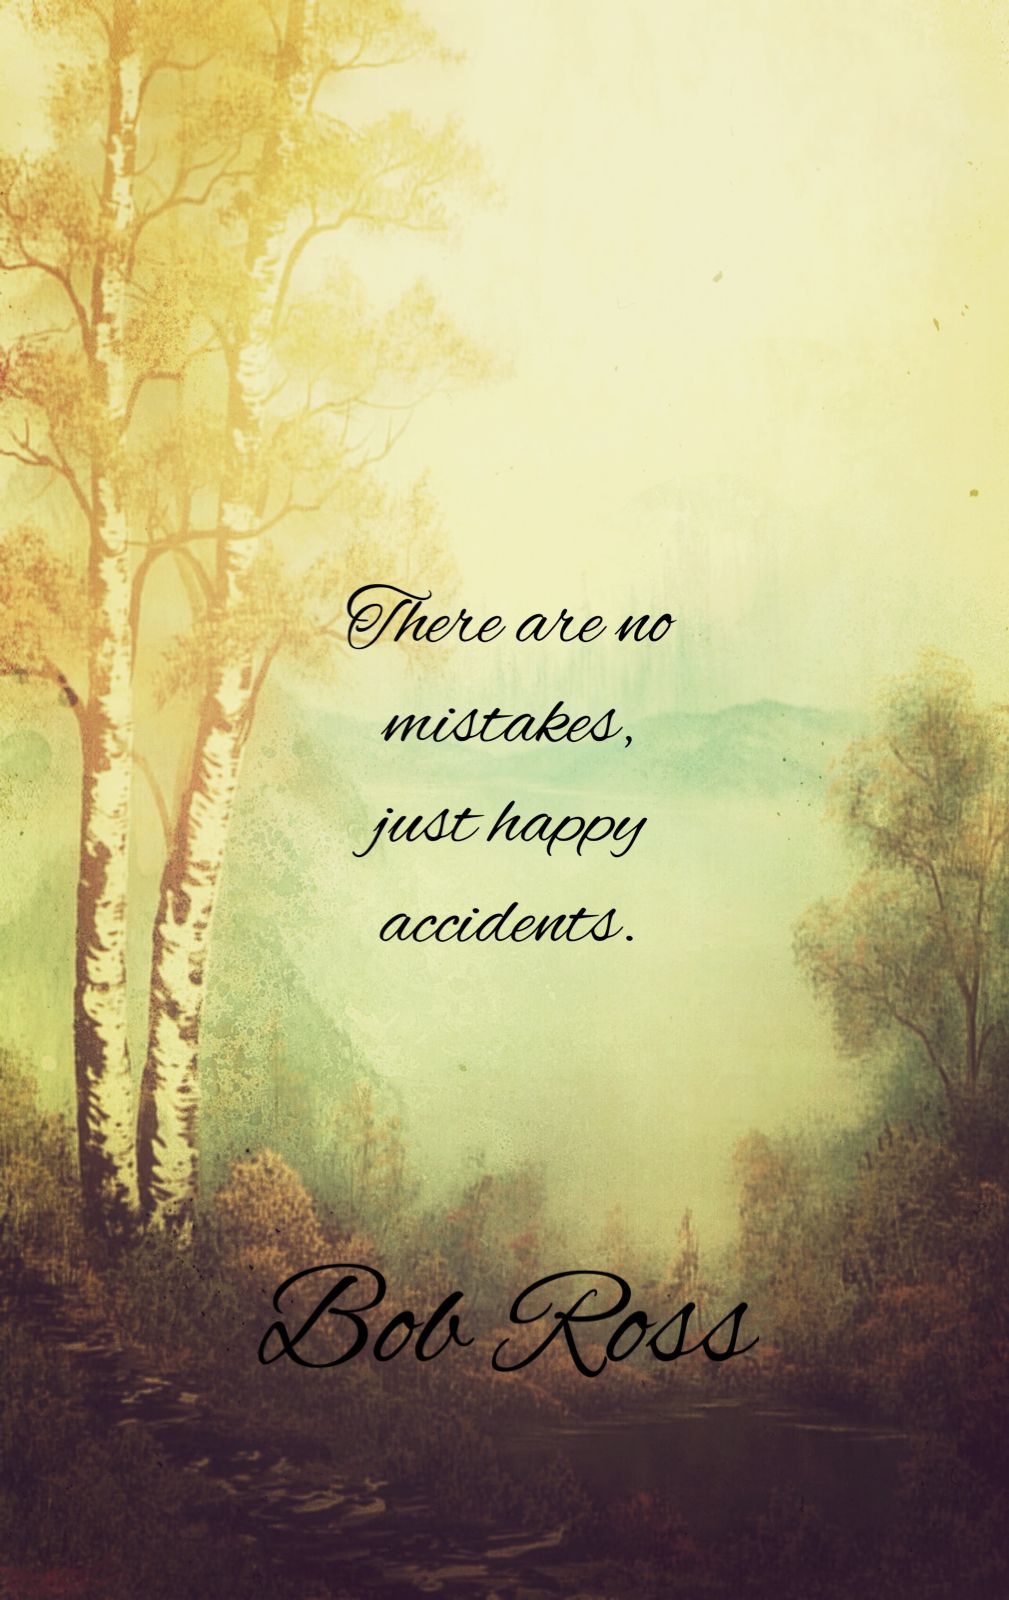 Bob Ross Quote Background - HD Wallpaper 